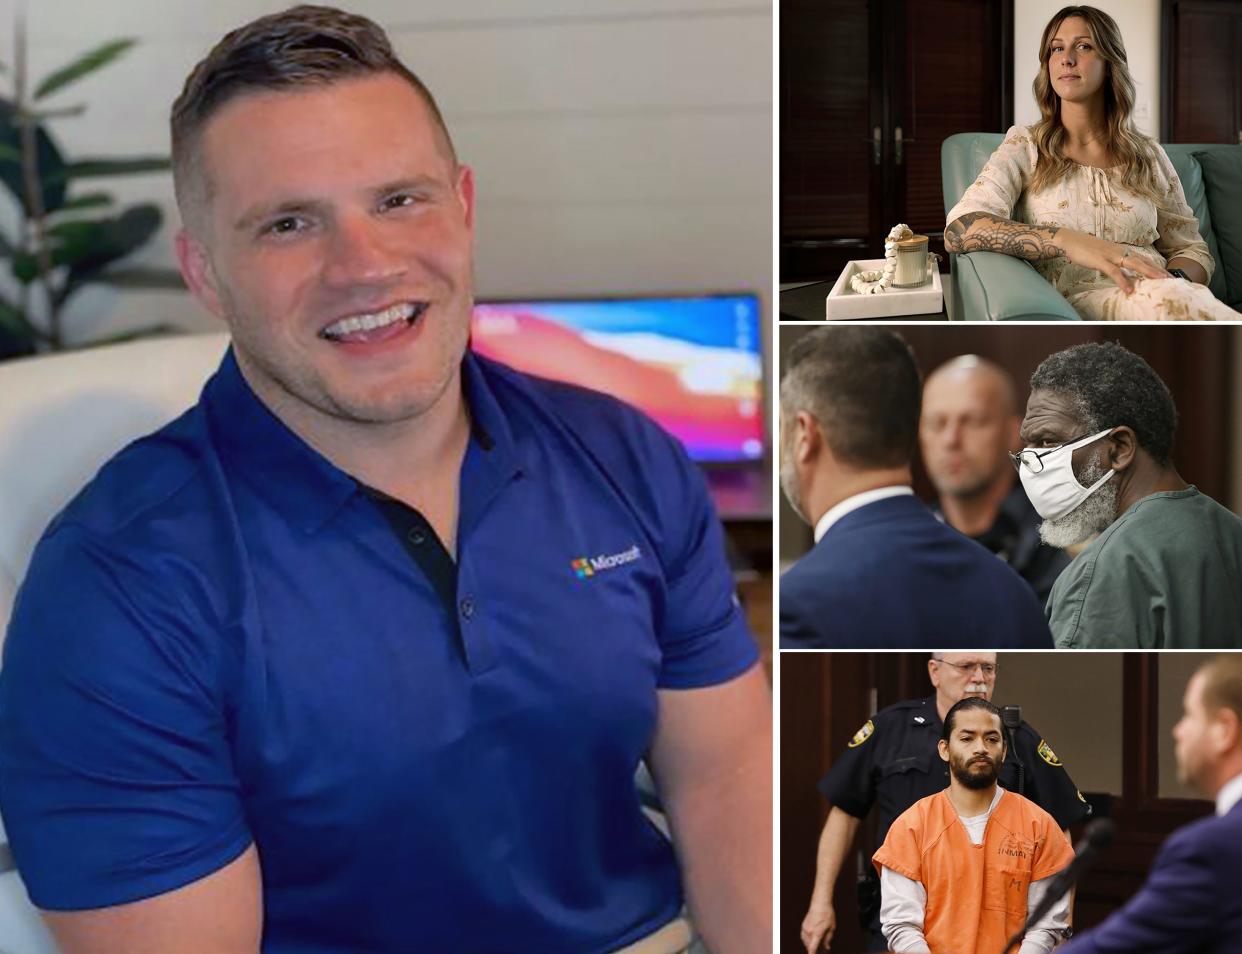 Composite of Jared Bridegan, left, who died in an ambush-style murder on Feb. 16, 2022, after leaving the home of ex-wife Shanna Gardner, upper right, in Jacksonville Beach. She is charged in the murder plot along with Henry Tenon, center right, and Mario Fernandez Saldana, bottom right, who is married to Shanna.